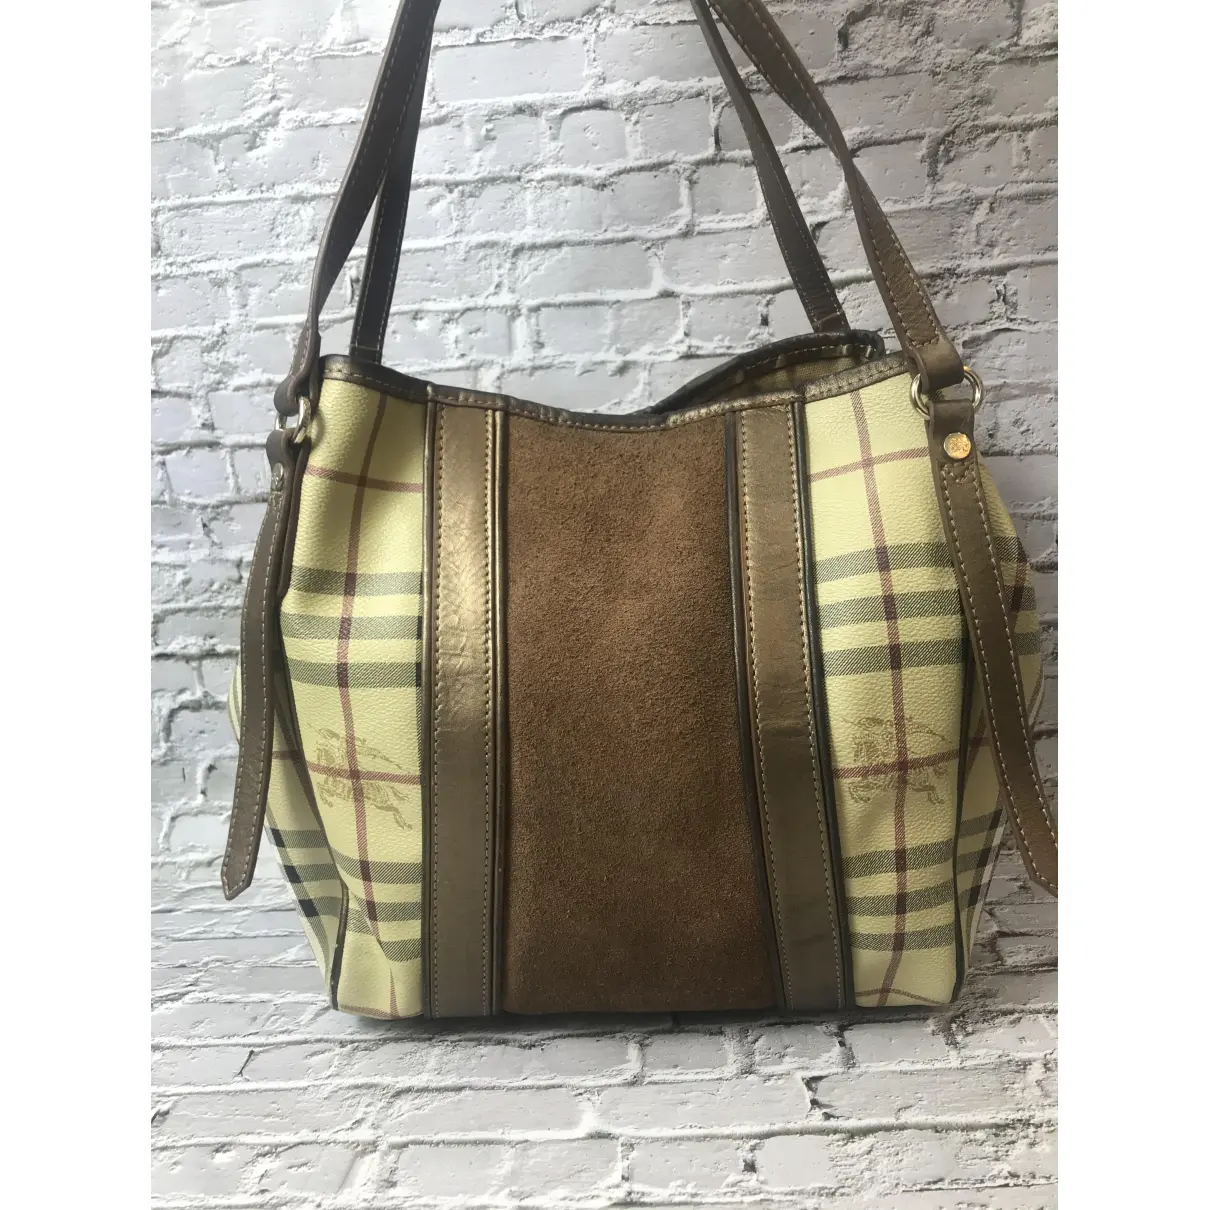 Buy Burberry Leather bag online